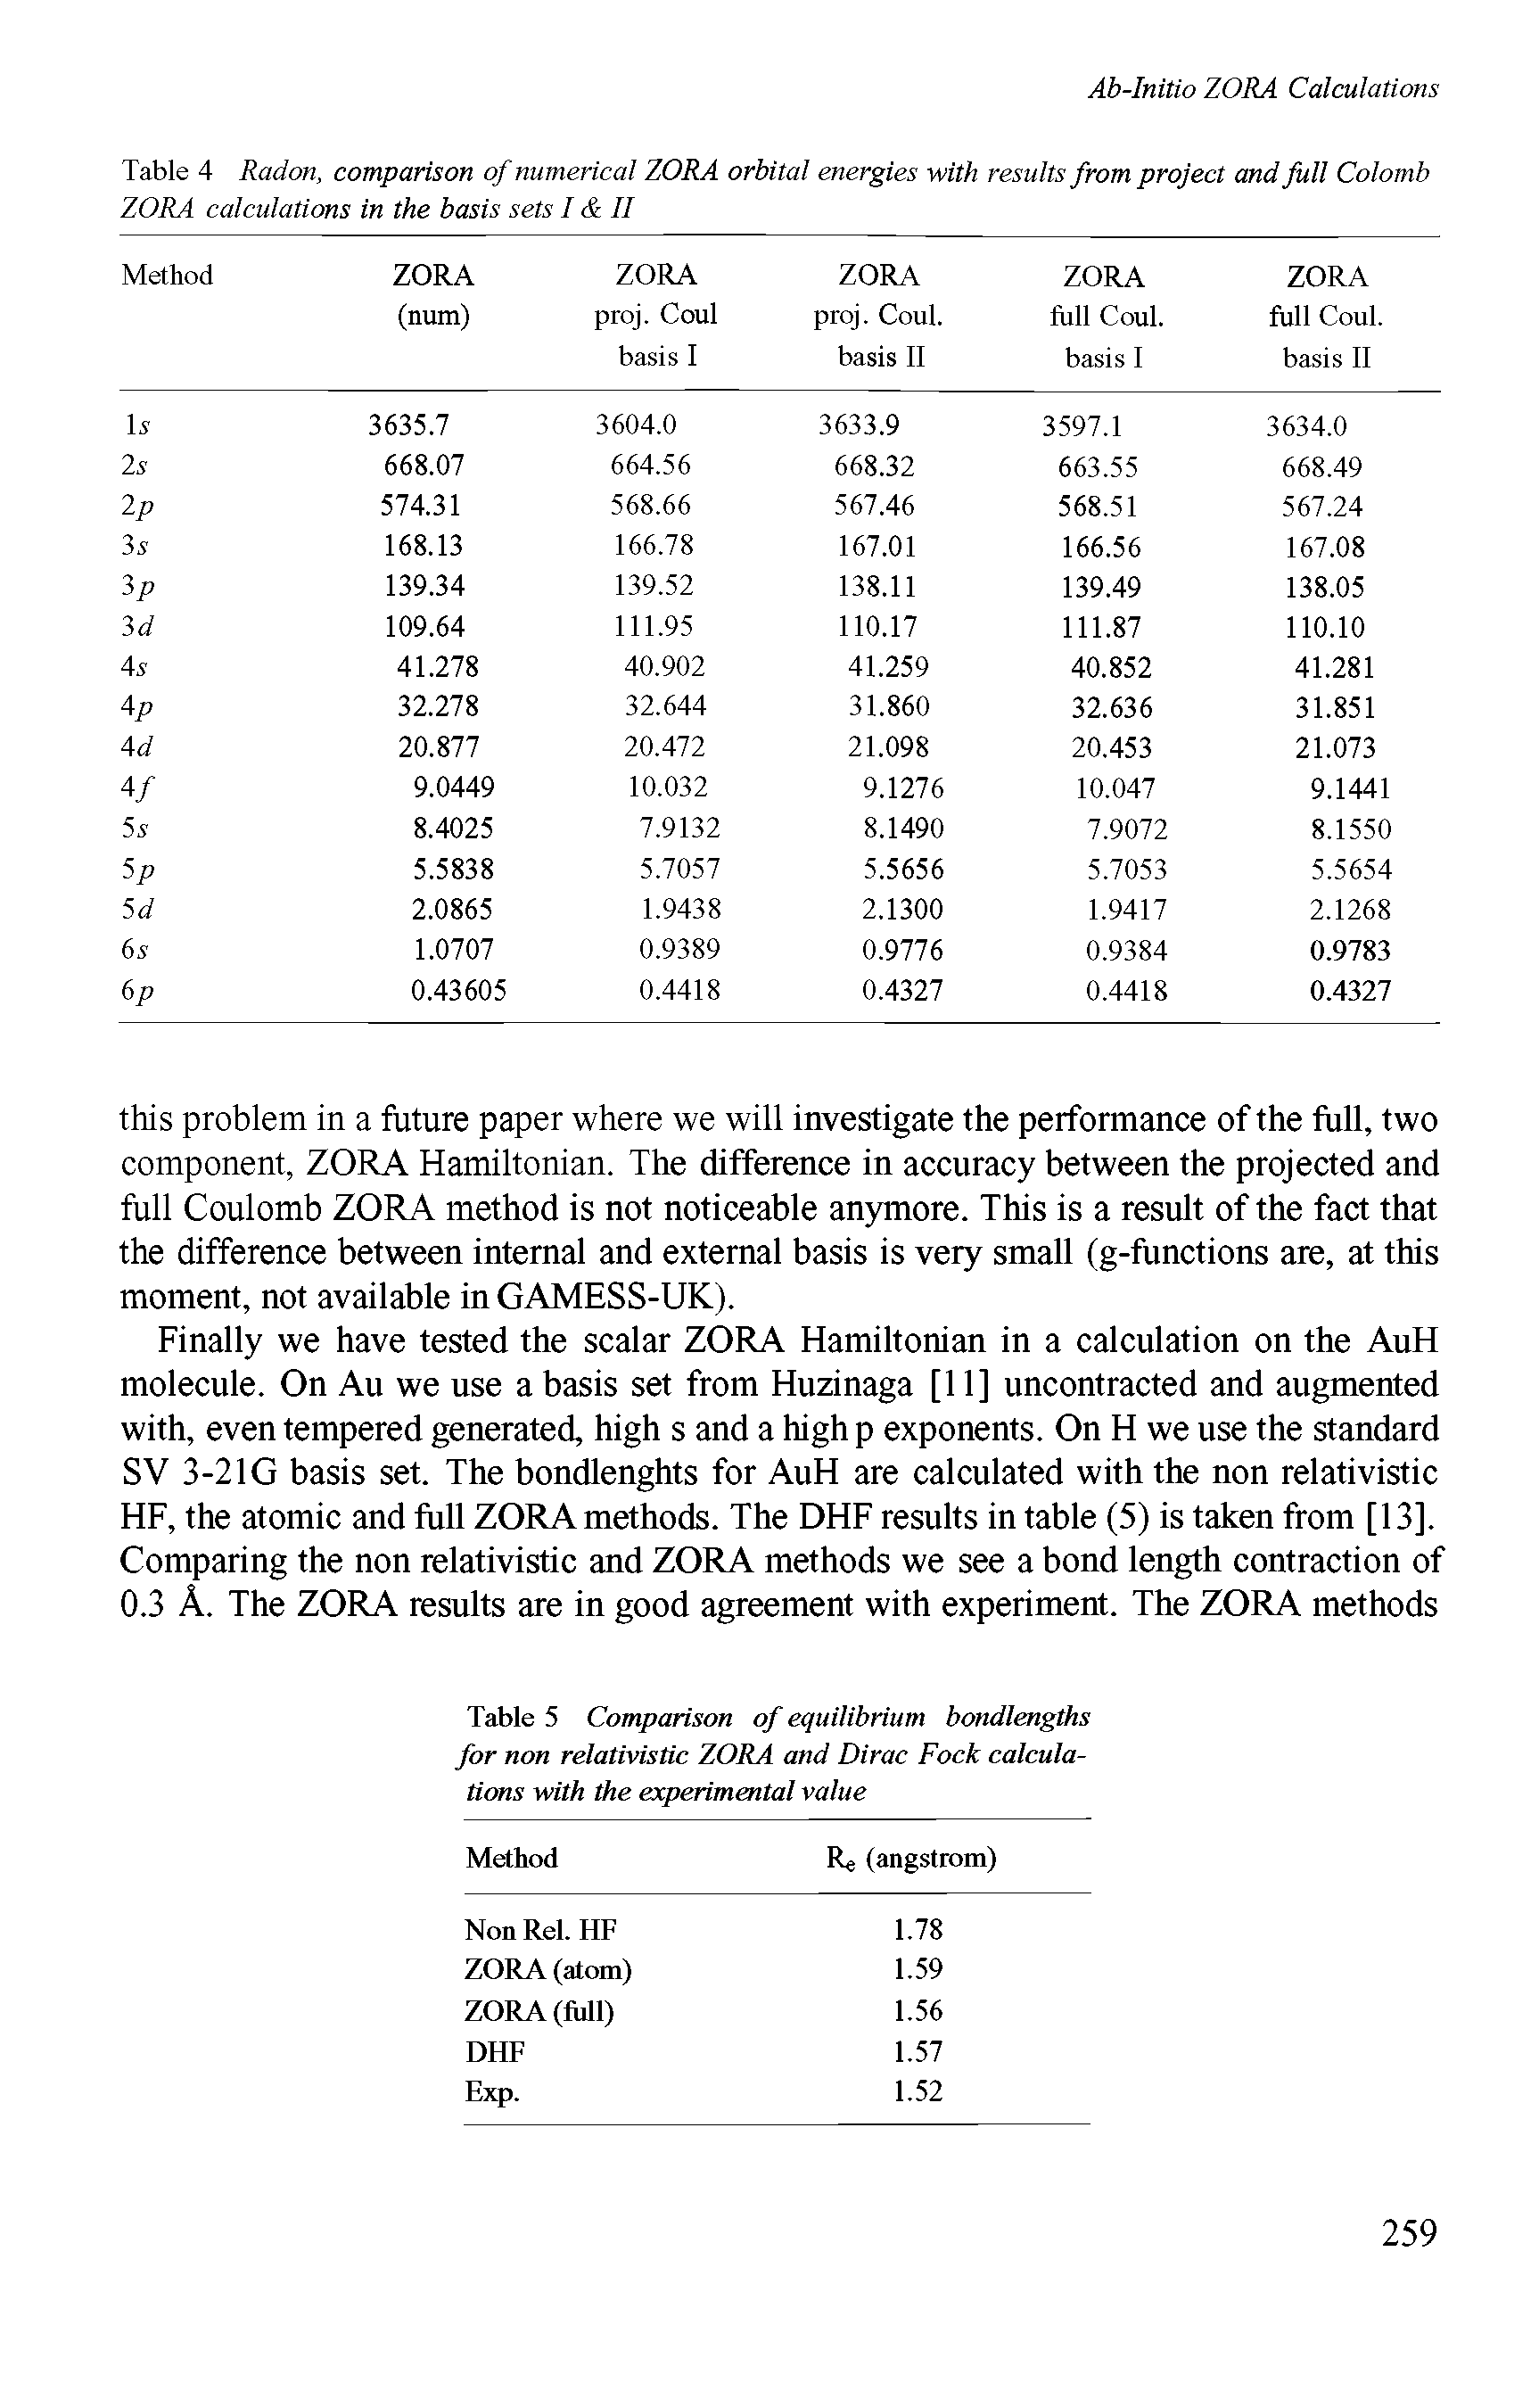 Table 5 Comparison of equilibrium bondlengths for non relativistic ZORA and Dirac Fock calculations with the experimental value...